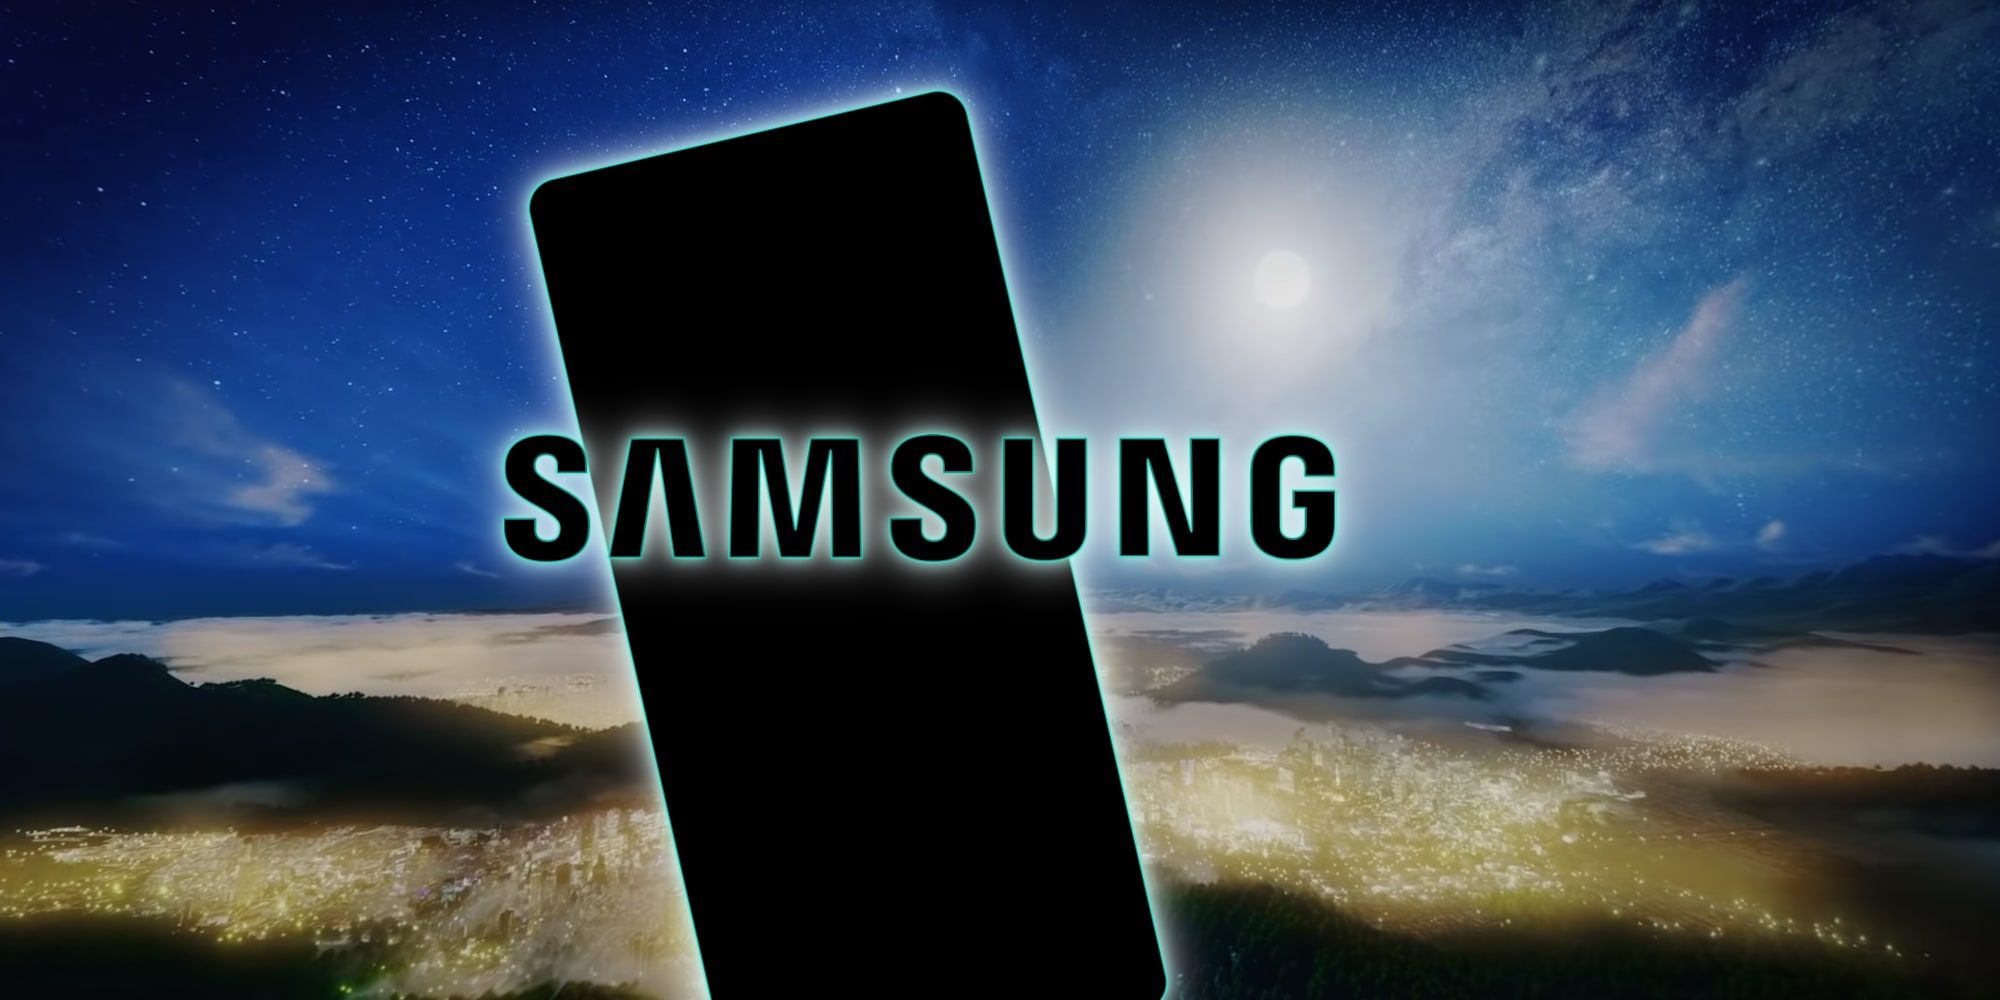 Samsung Logo And Galaxy Silhouette Night Photography Teaser